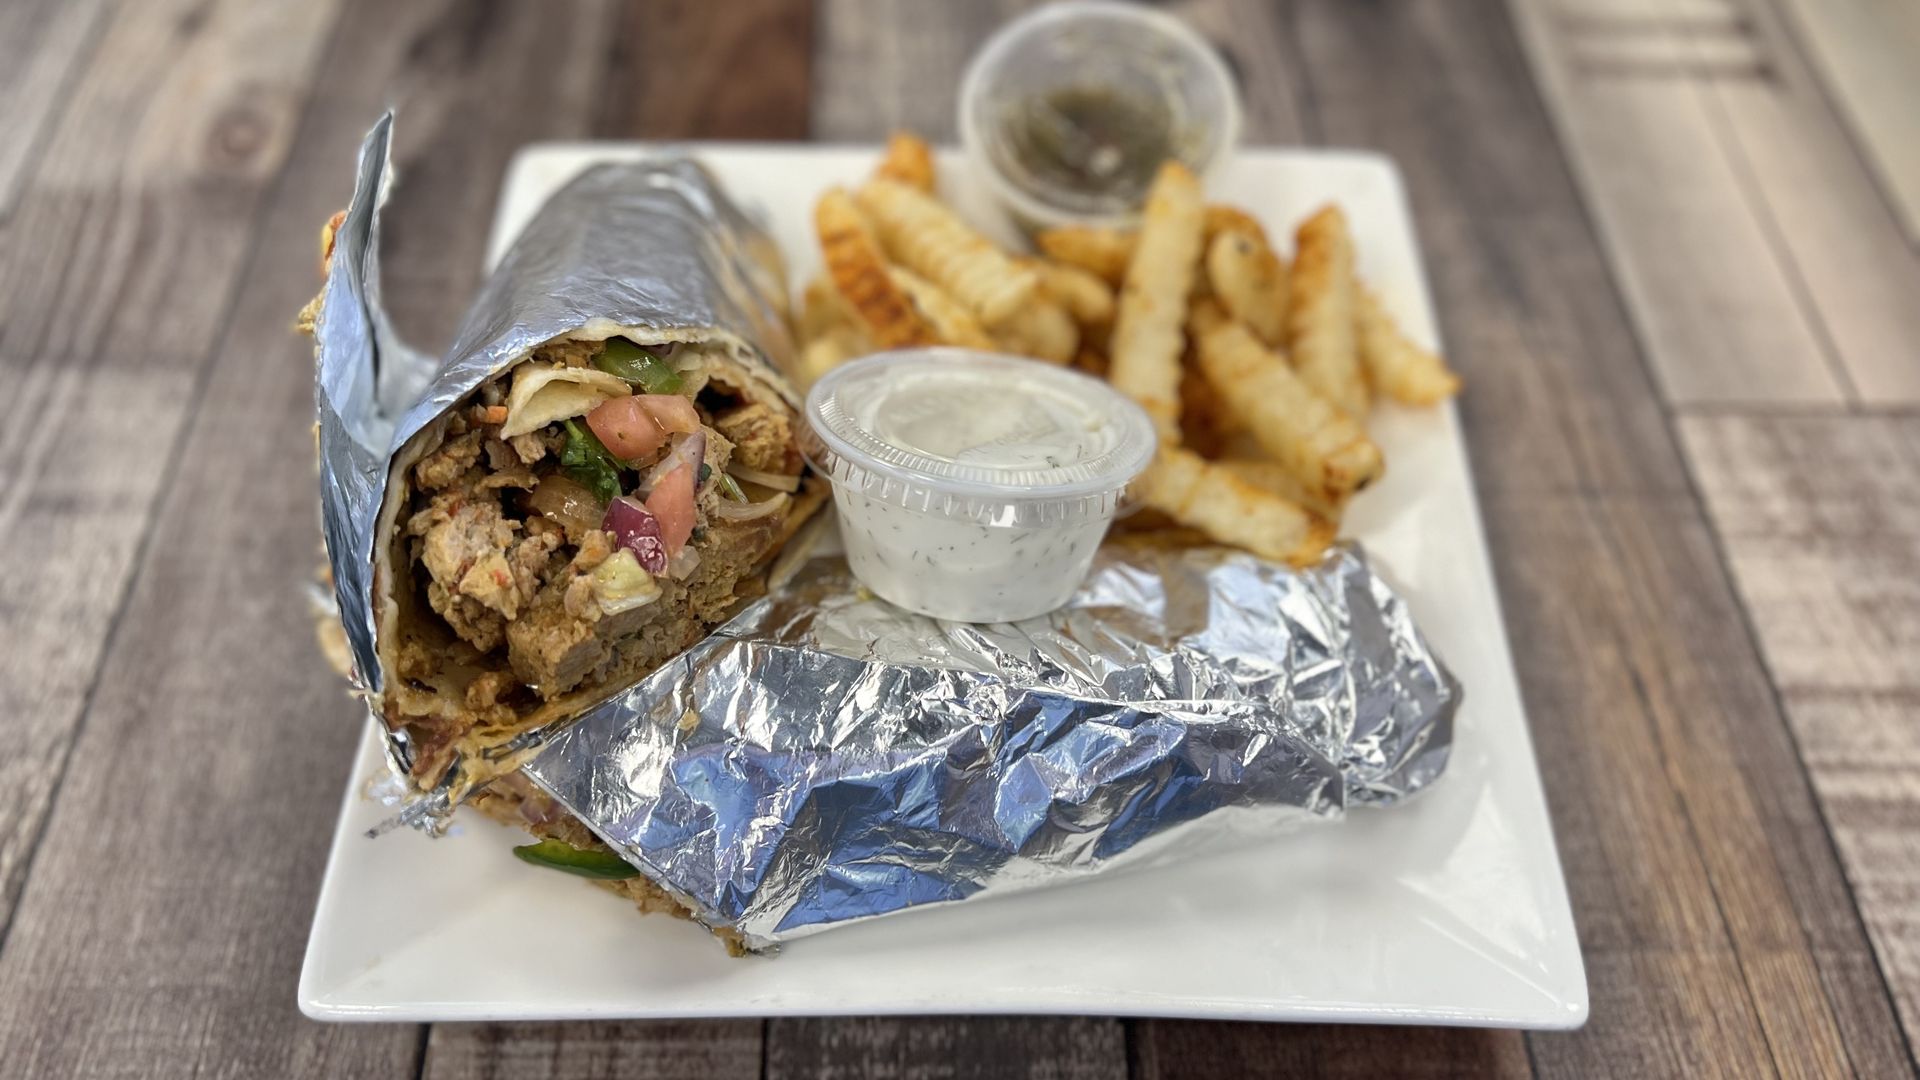 A delicious looking chicken wrap and fries 